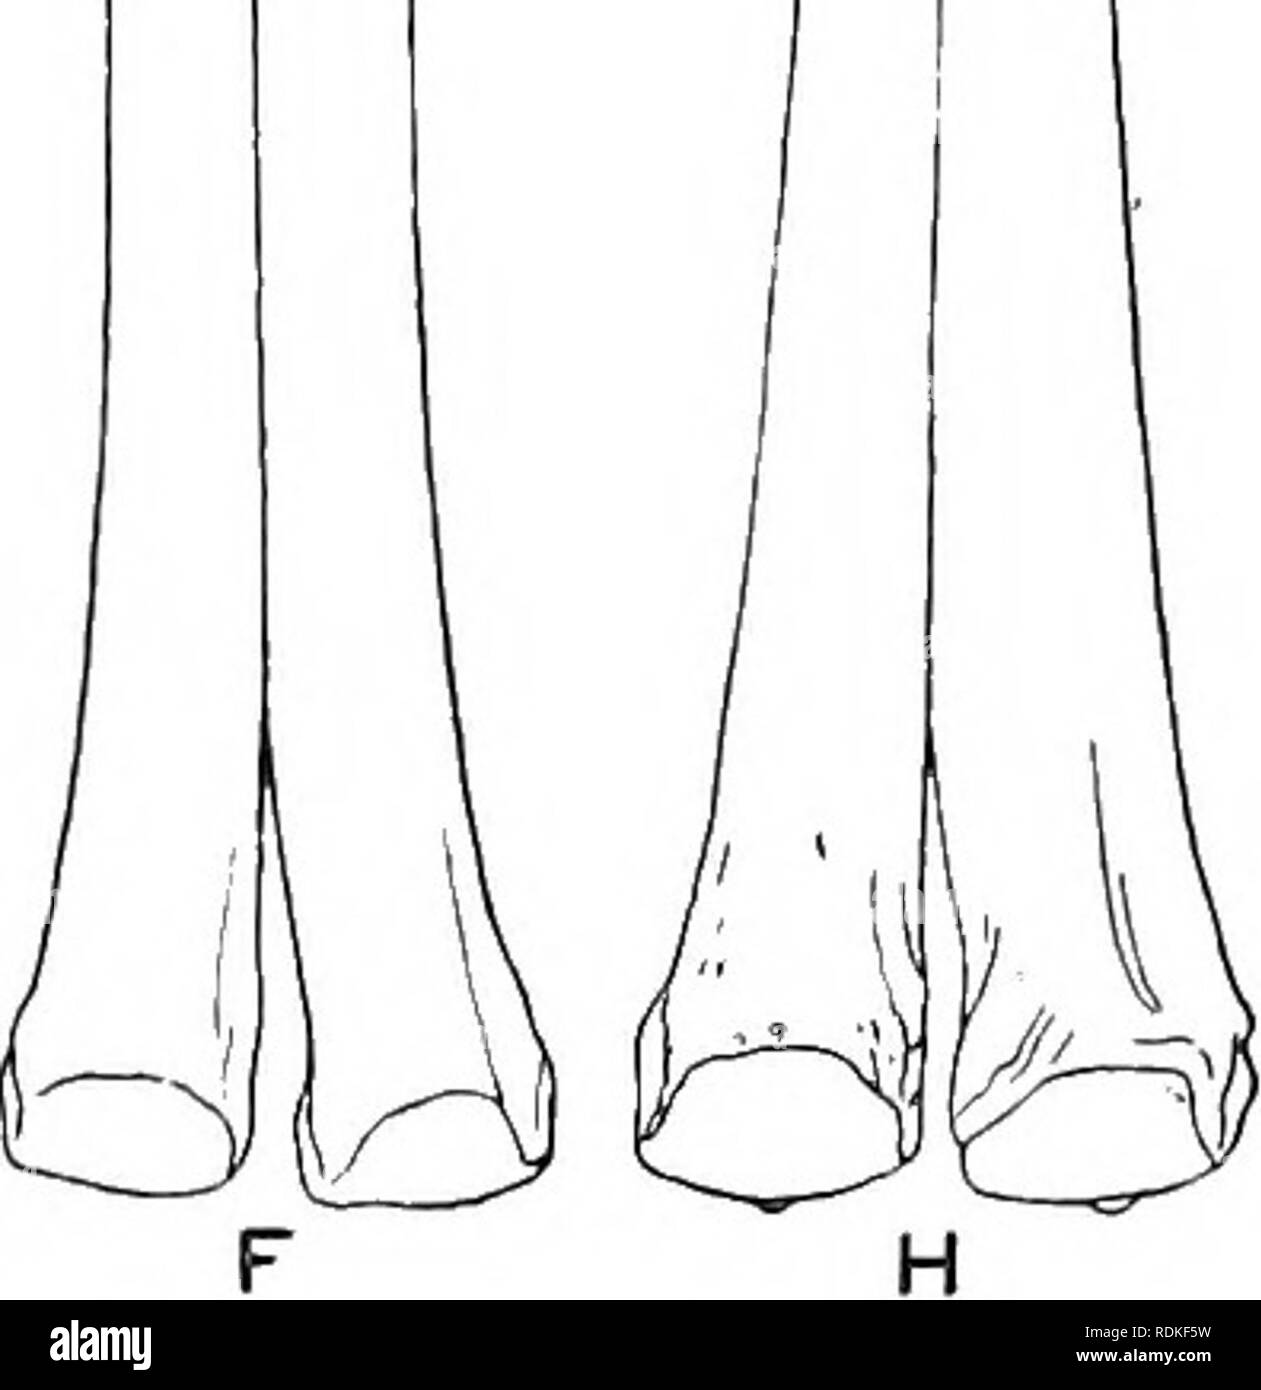 The Cambridge natural history. Zoology. Fig. 111.—Series of metacarpals and  metatarsals of Camelidae, to show secular and progressive increase in size.  From left to right the species are Protylopus petersonij PoebrotJieriiim